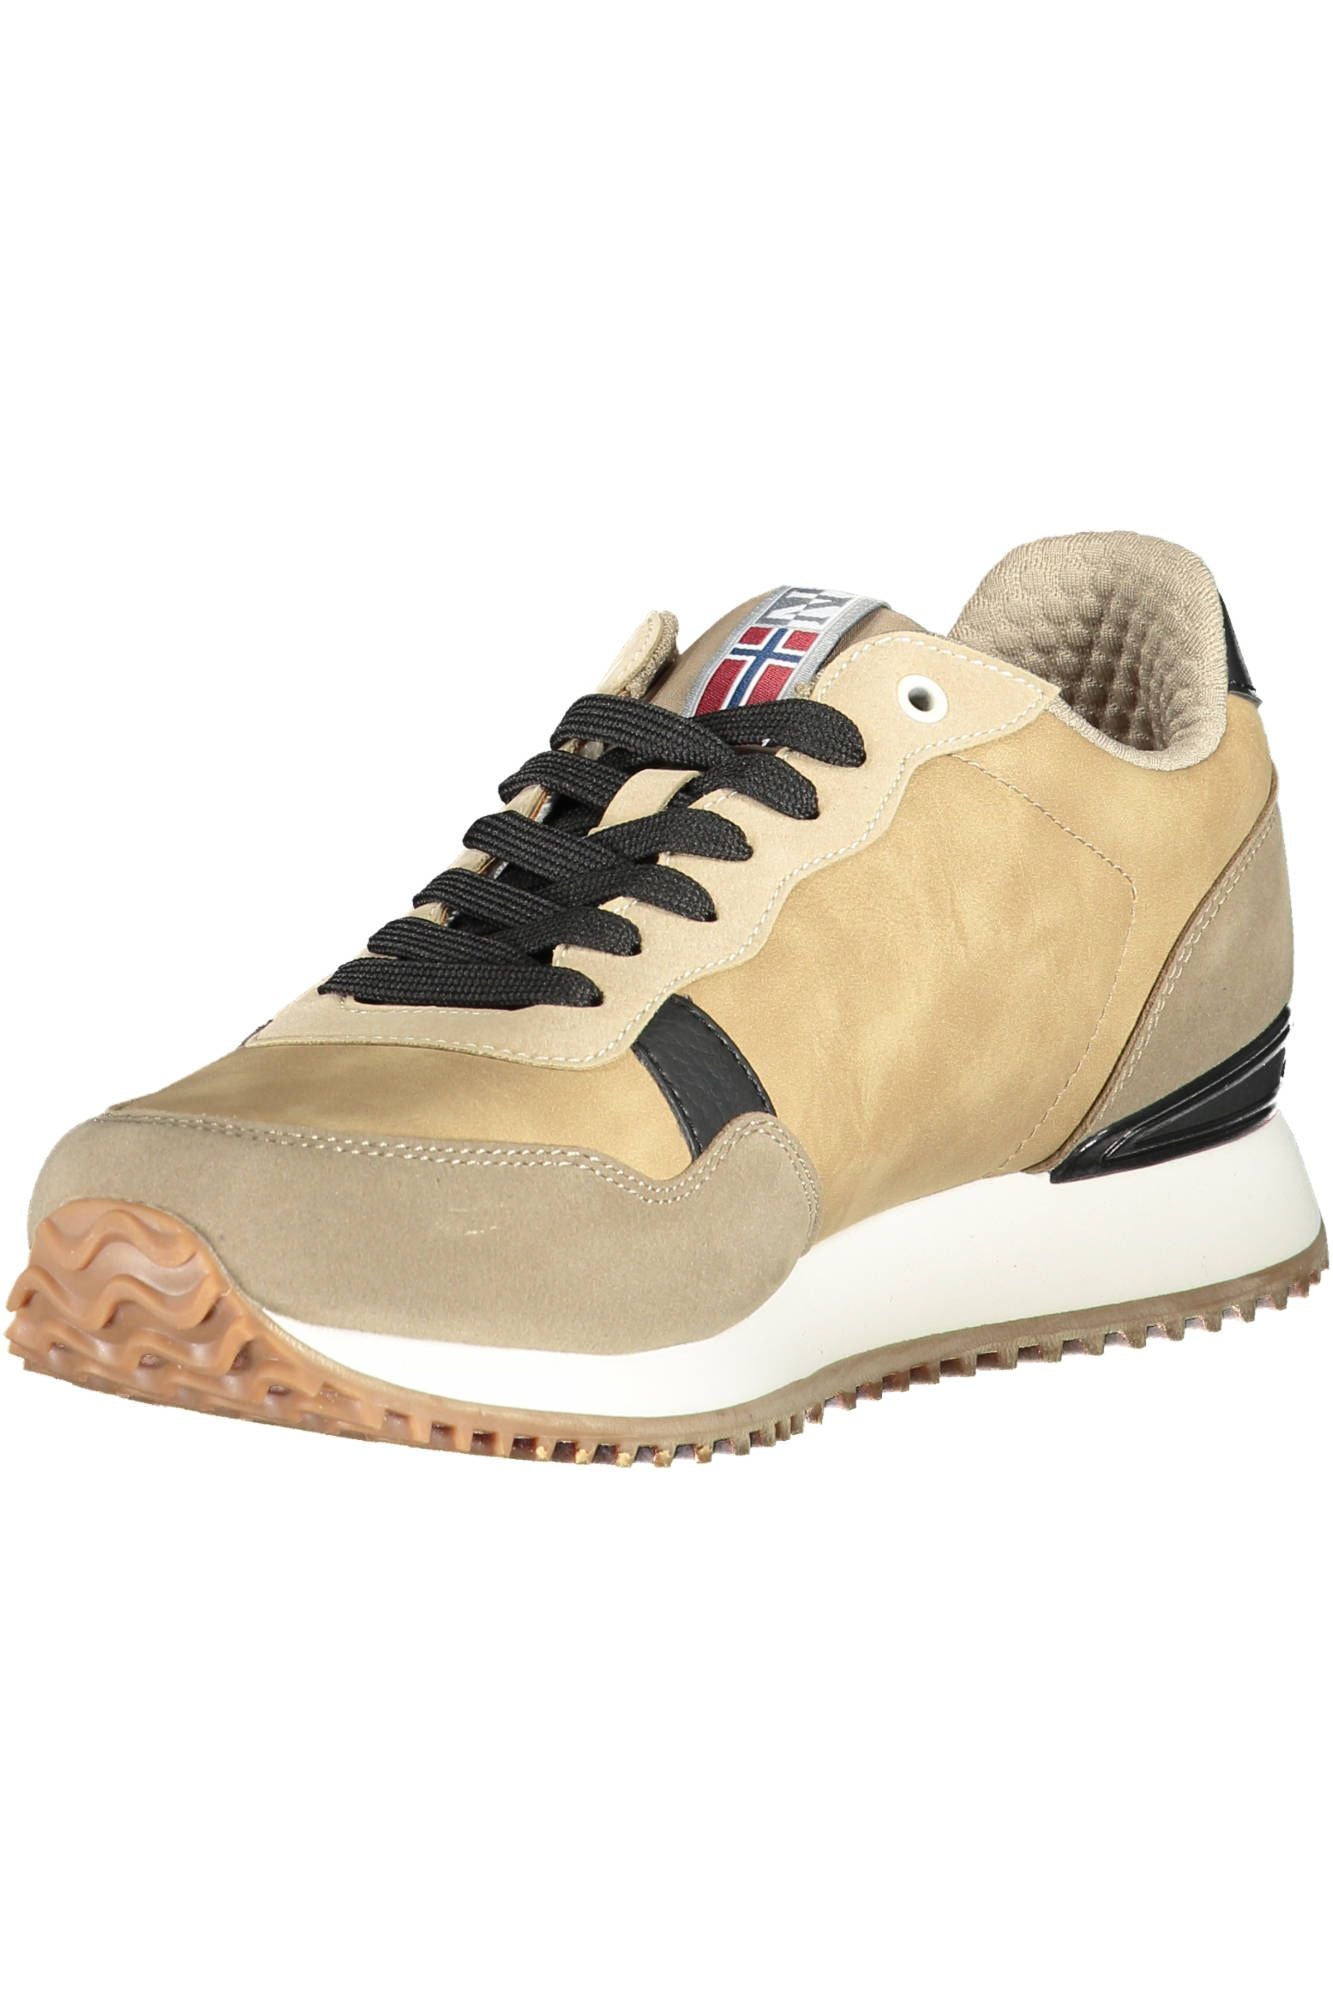 Beige Lace-Up Sneakers with Contrasting Accents